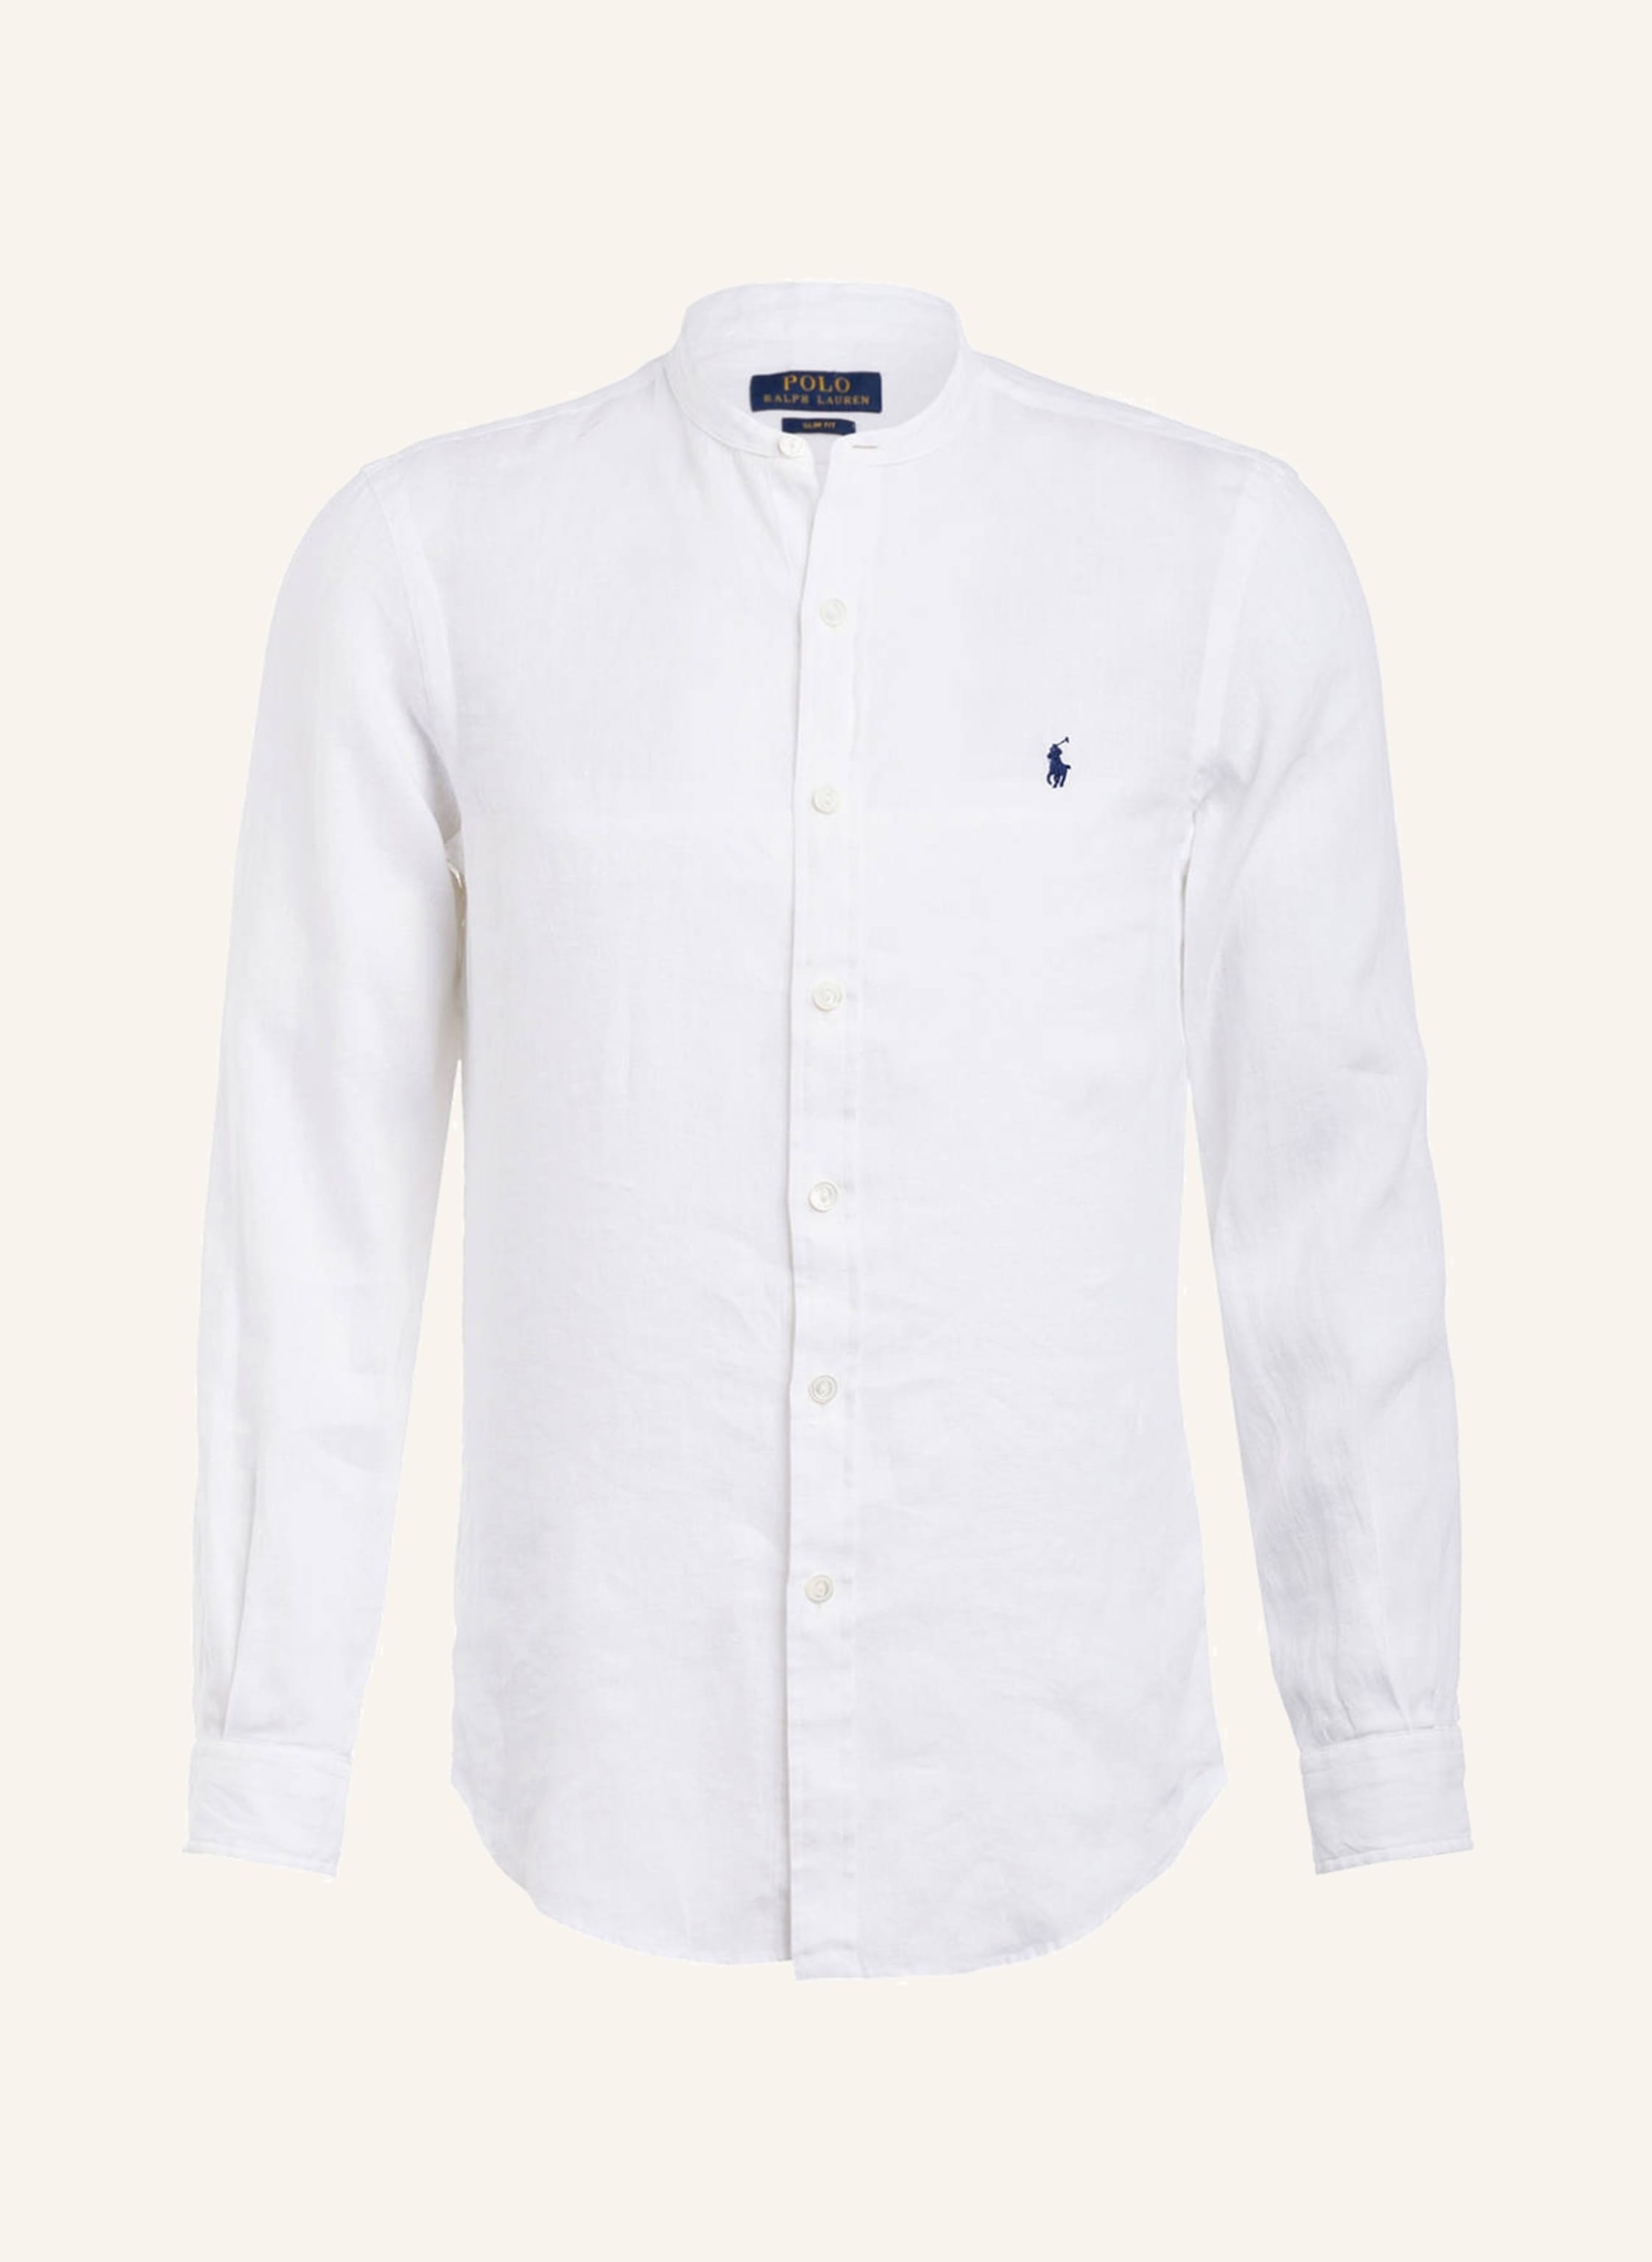 POLO RALPH LAUREN Linen shirt slim fit with stand-up collar in white |  Breuninger